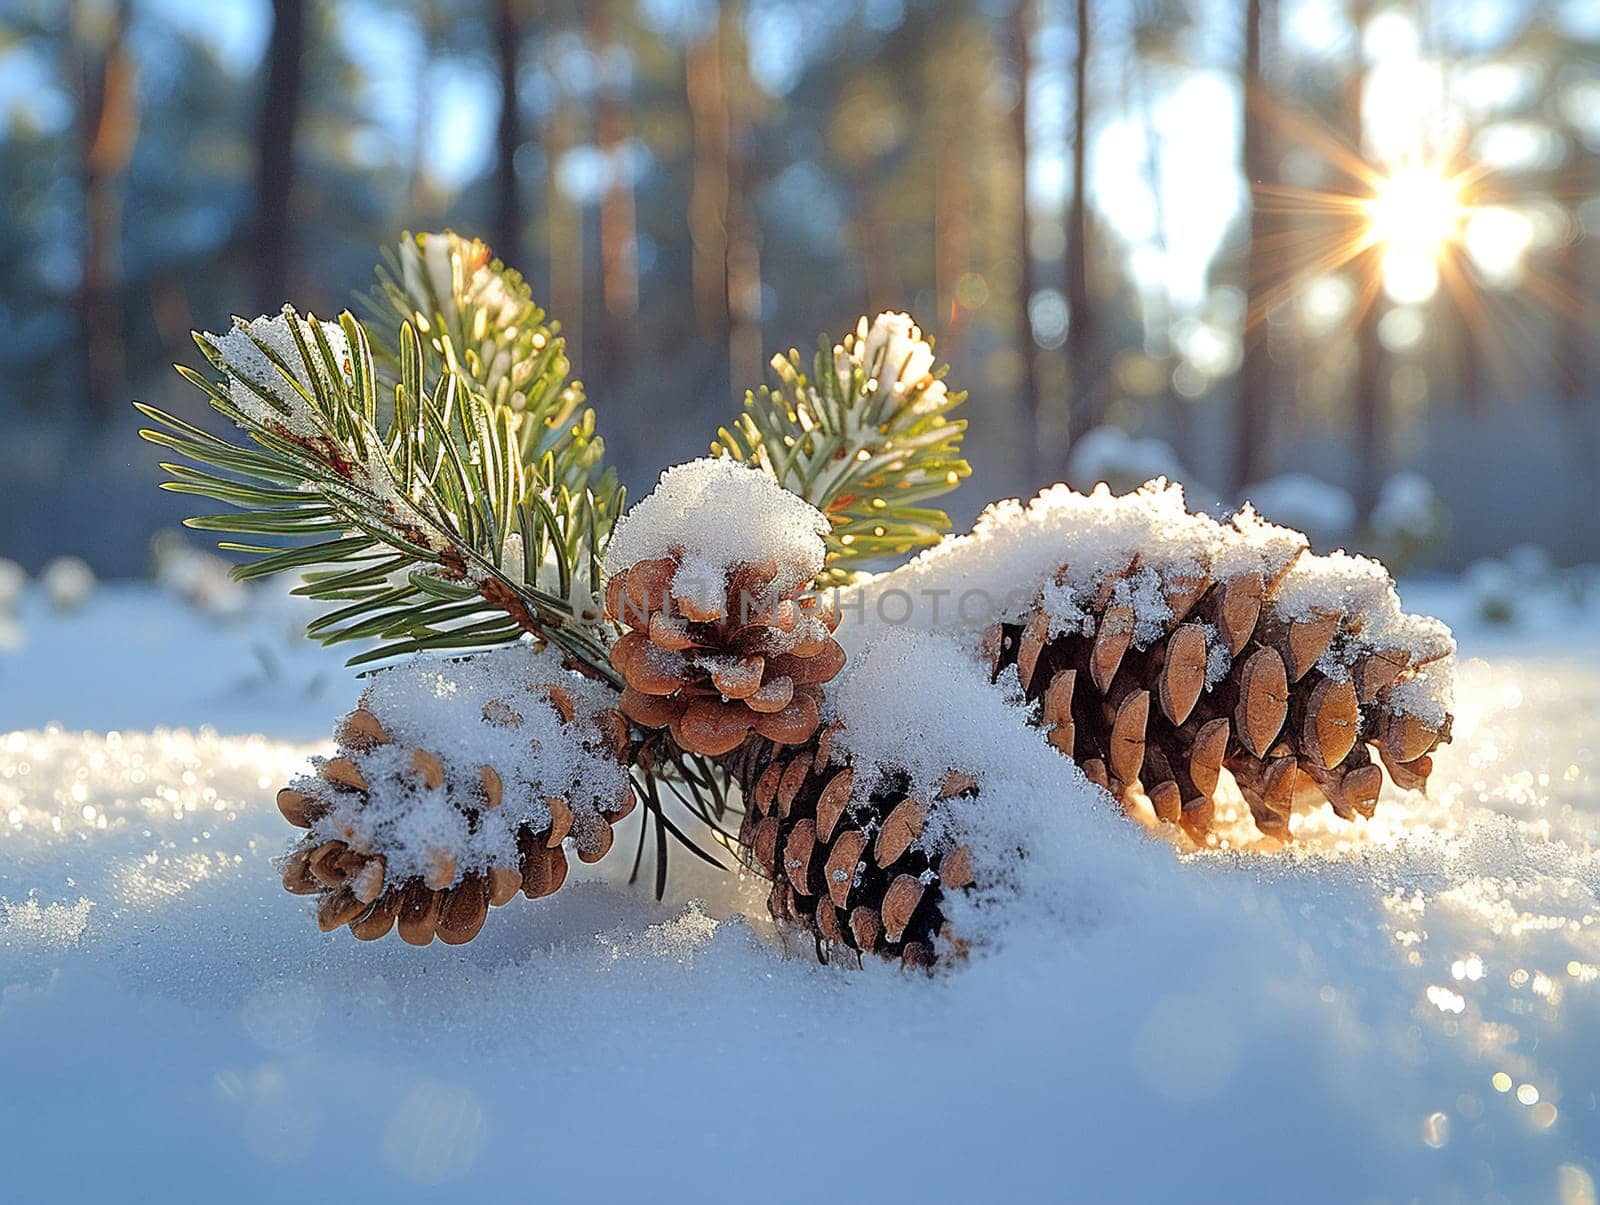 Freshly fallen snow on a pine branch, representing winter's purity and calm.